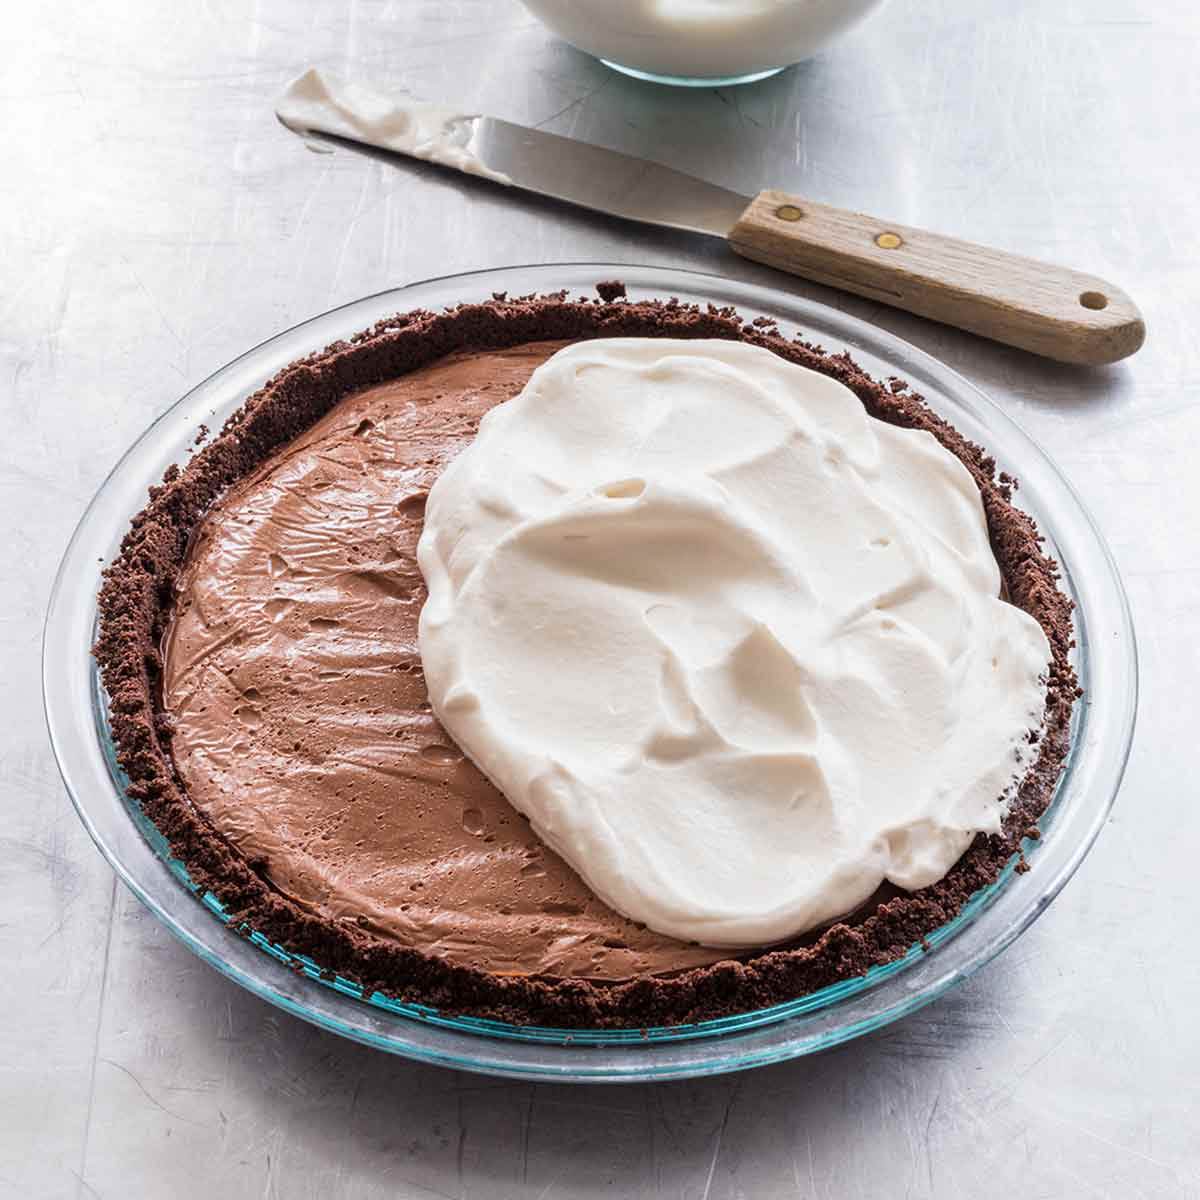 A dark chocolate cream pie partially covered with whipped cream and a knife and a bowl of whipped cream on the side.